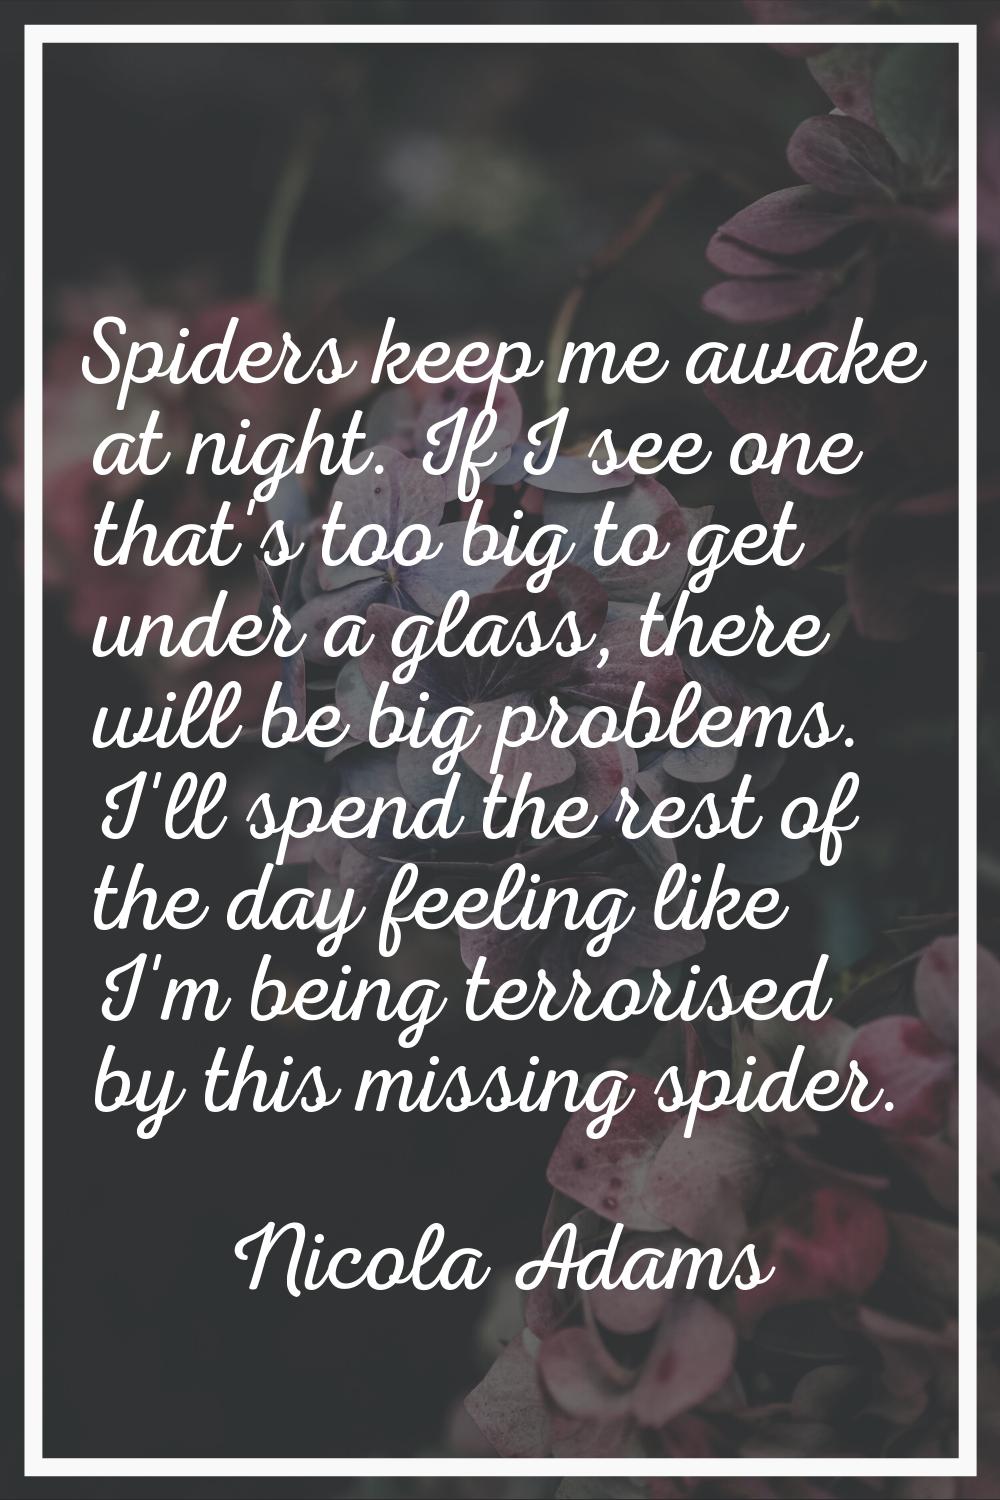 Spiders keep me awake at night. If I see one that's too big to get under a glass, there will be big